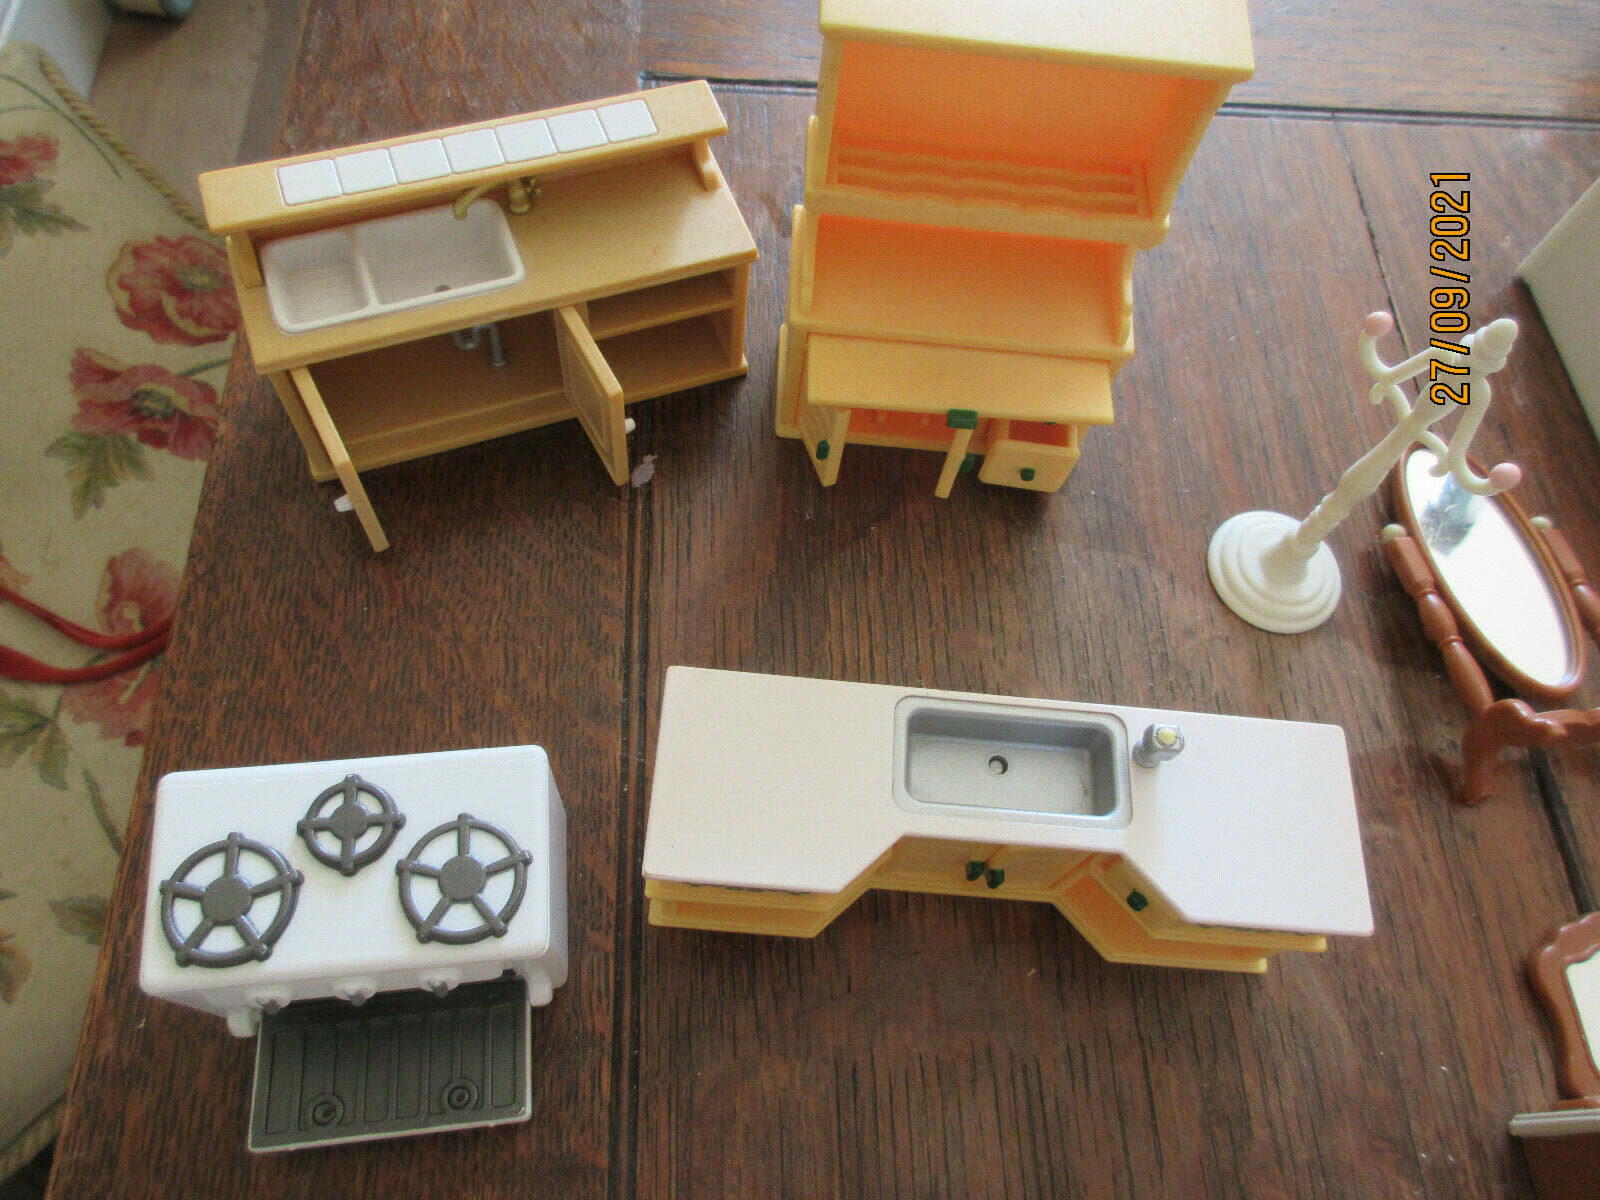 SYLVANIAN FAMILIES LARGE QUANITY OF HOUSE FURNITURE BEDS CARBOARDS CHAIRS TABLES Regularna zniżka